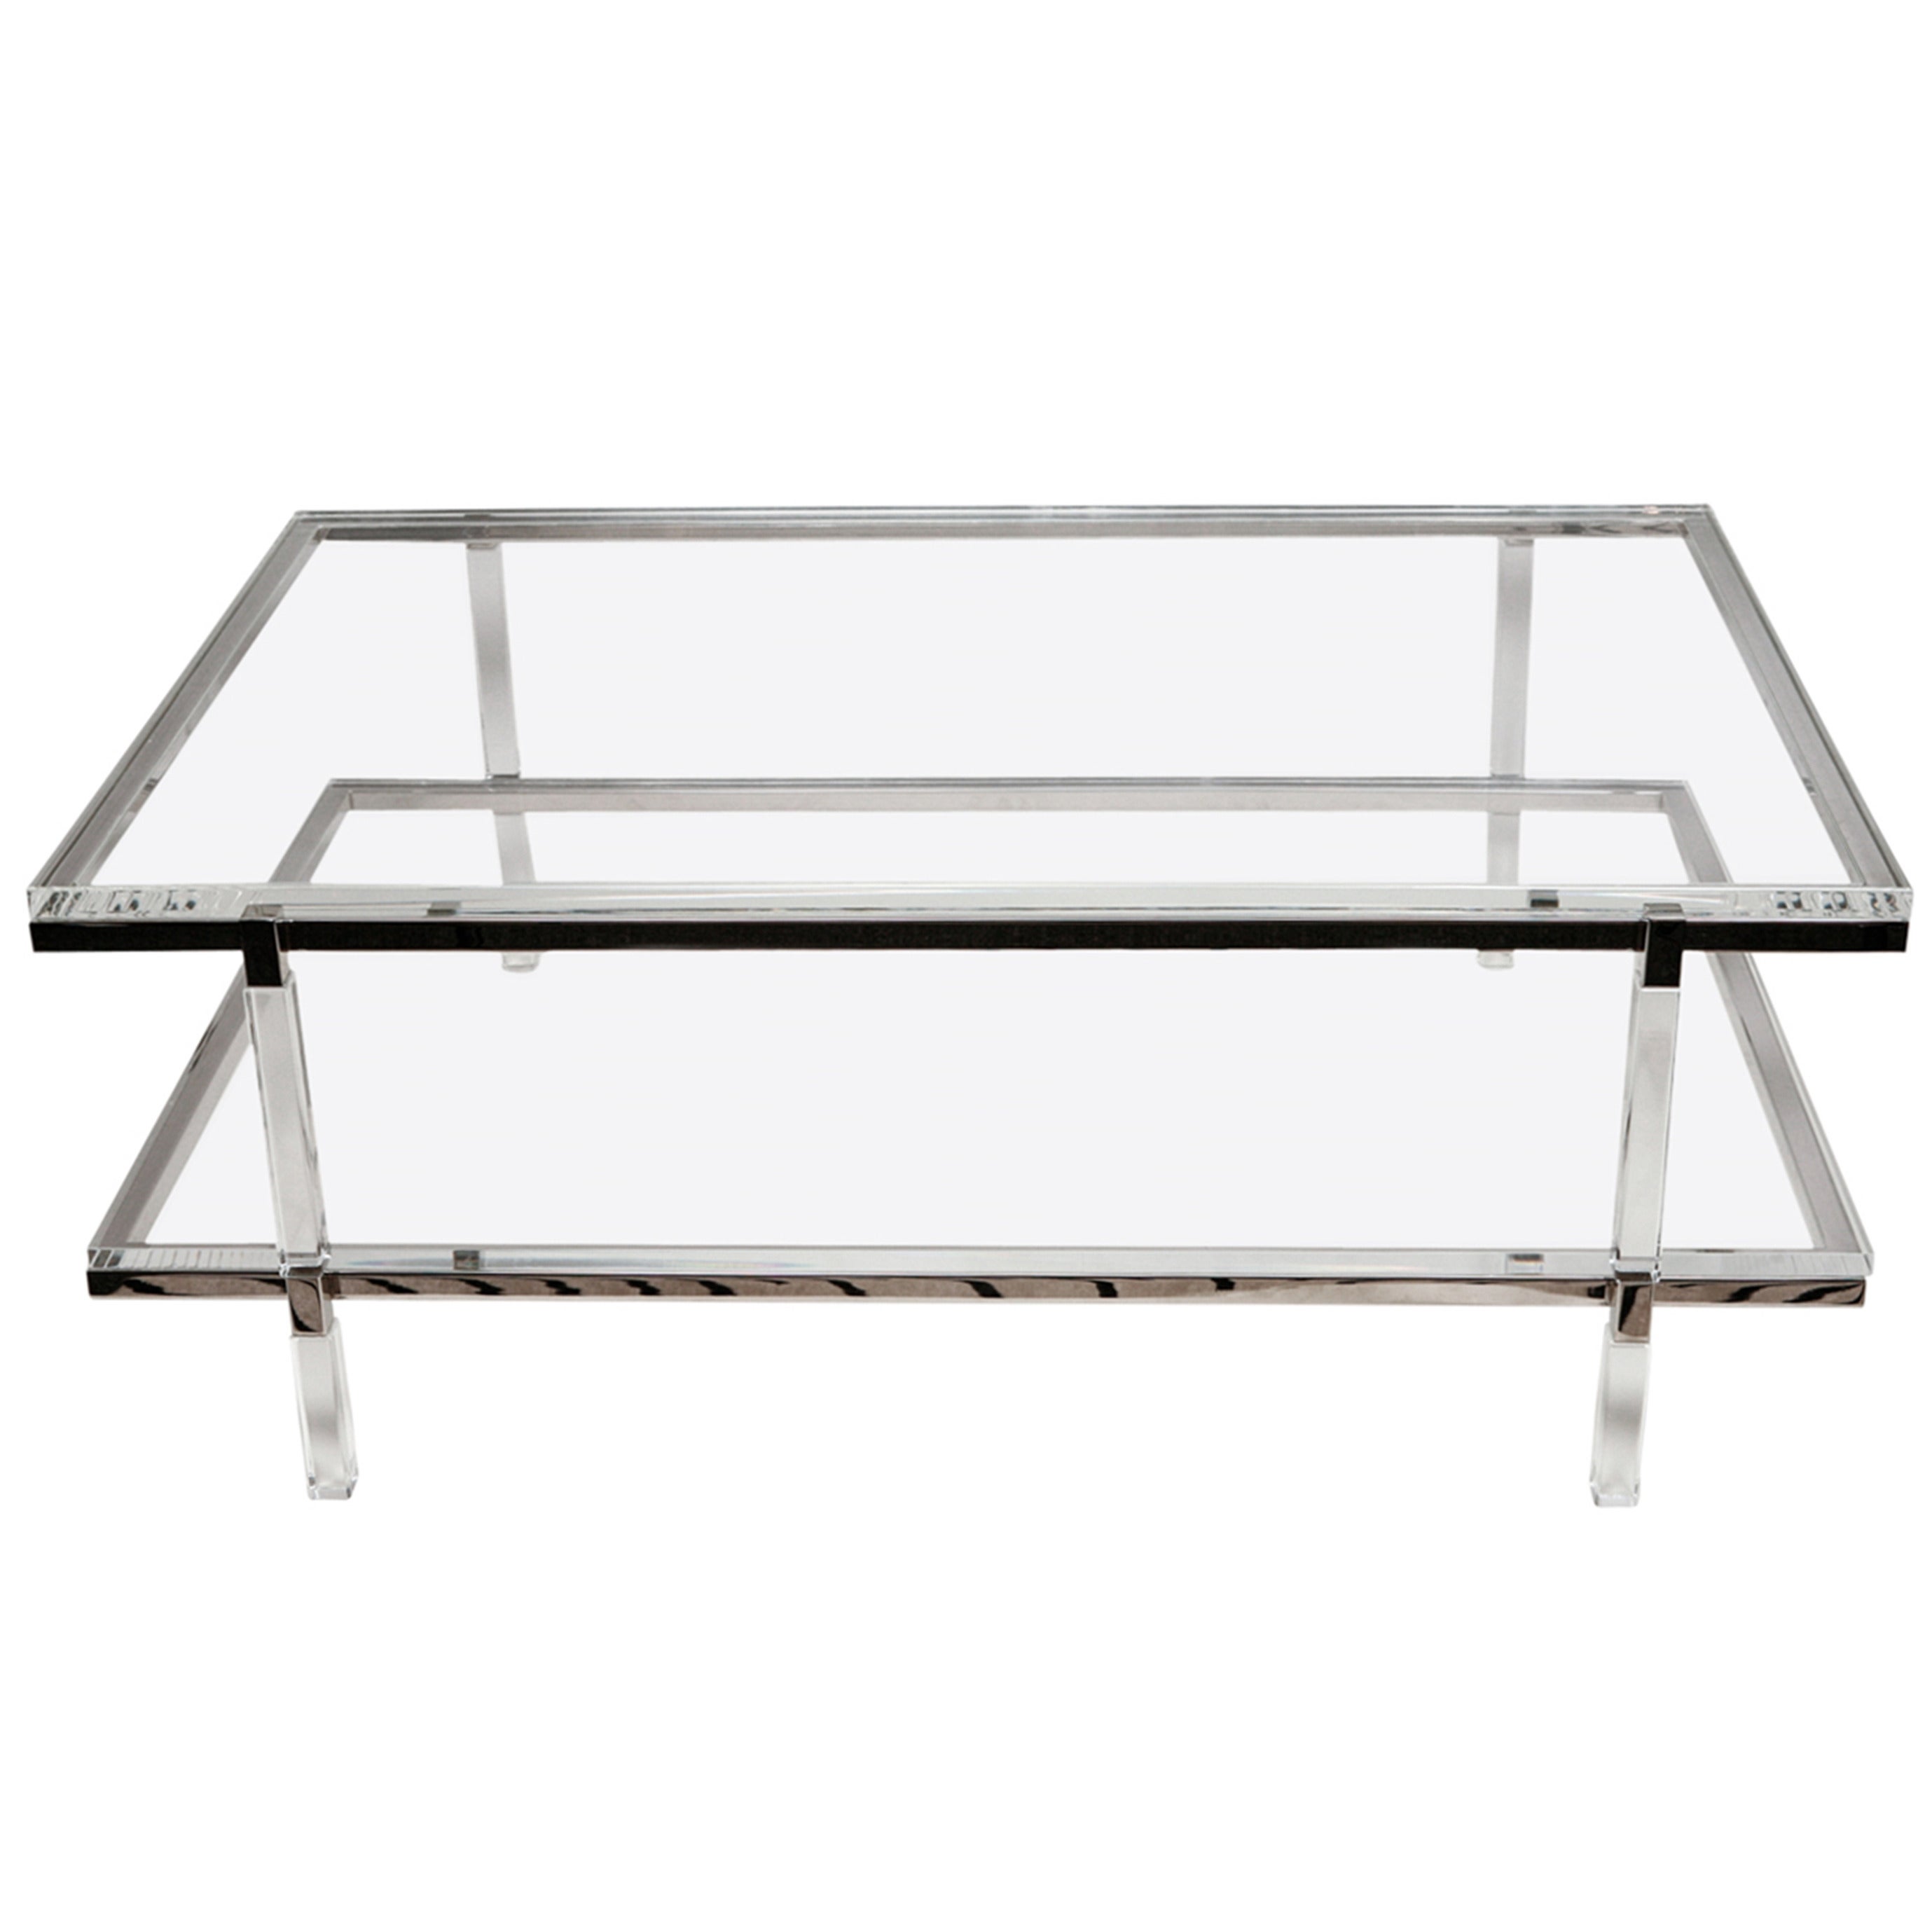 Lucite and Nickel Two-Level Coffee Table by Charles Hollis Jones